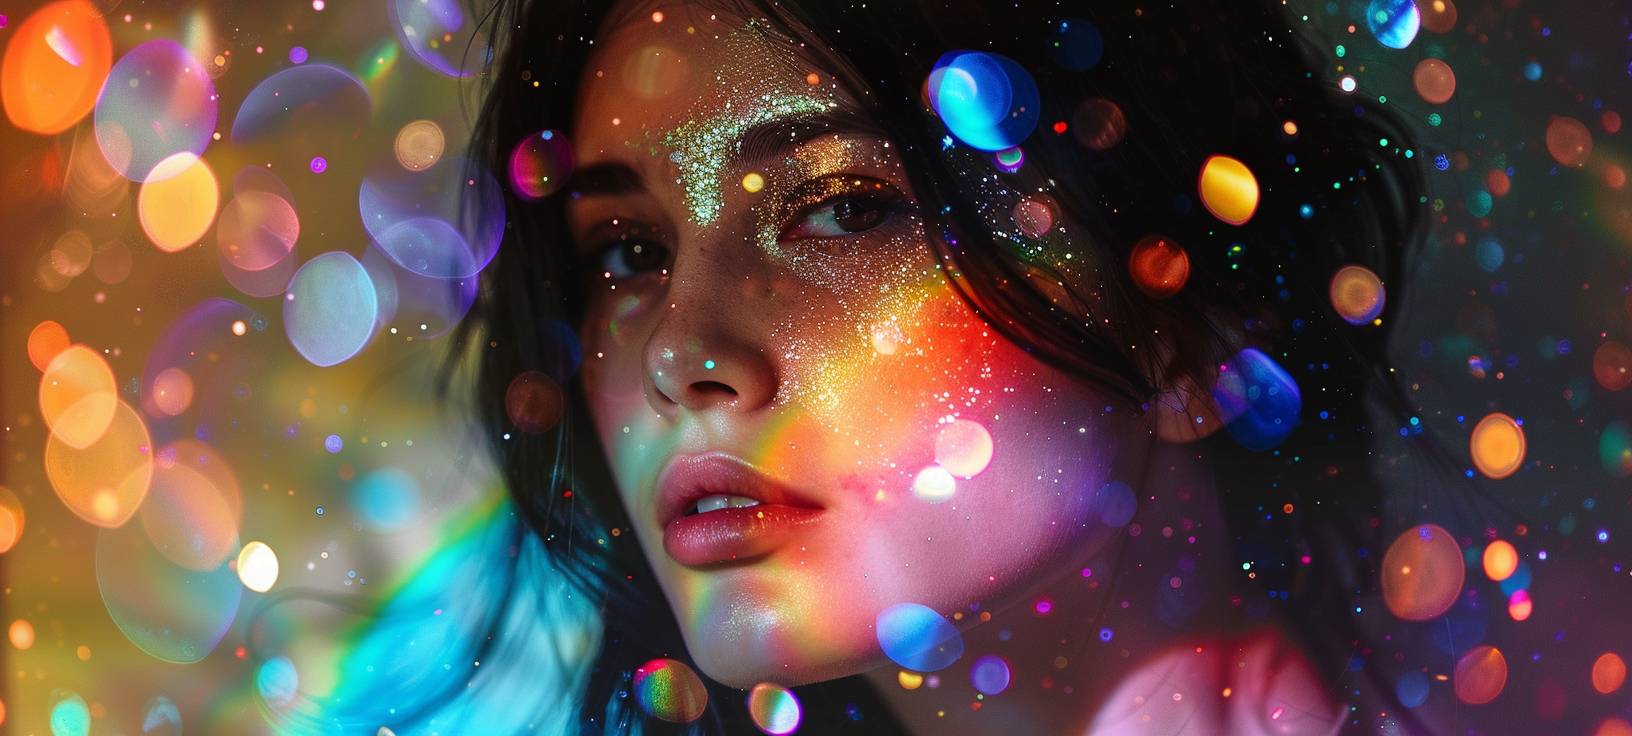 Portrait of a young woman with dark hair and a face illuminated by sparkling lights, set against a holographic, shimmering, glittery rainbowcore background, captured with double exposure photography to create a psychedelic, cinematic beauty